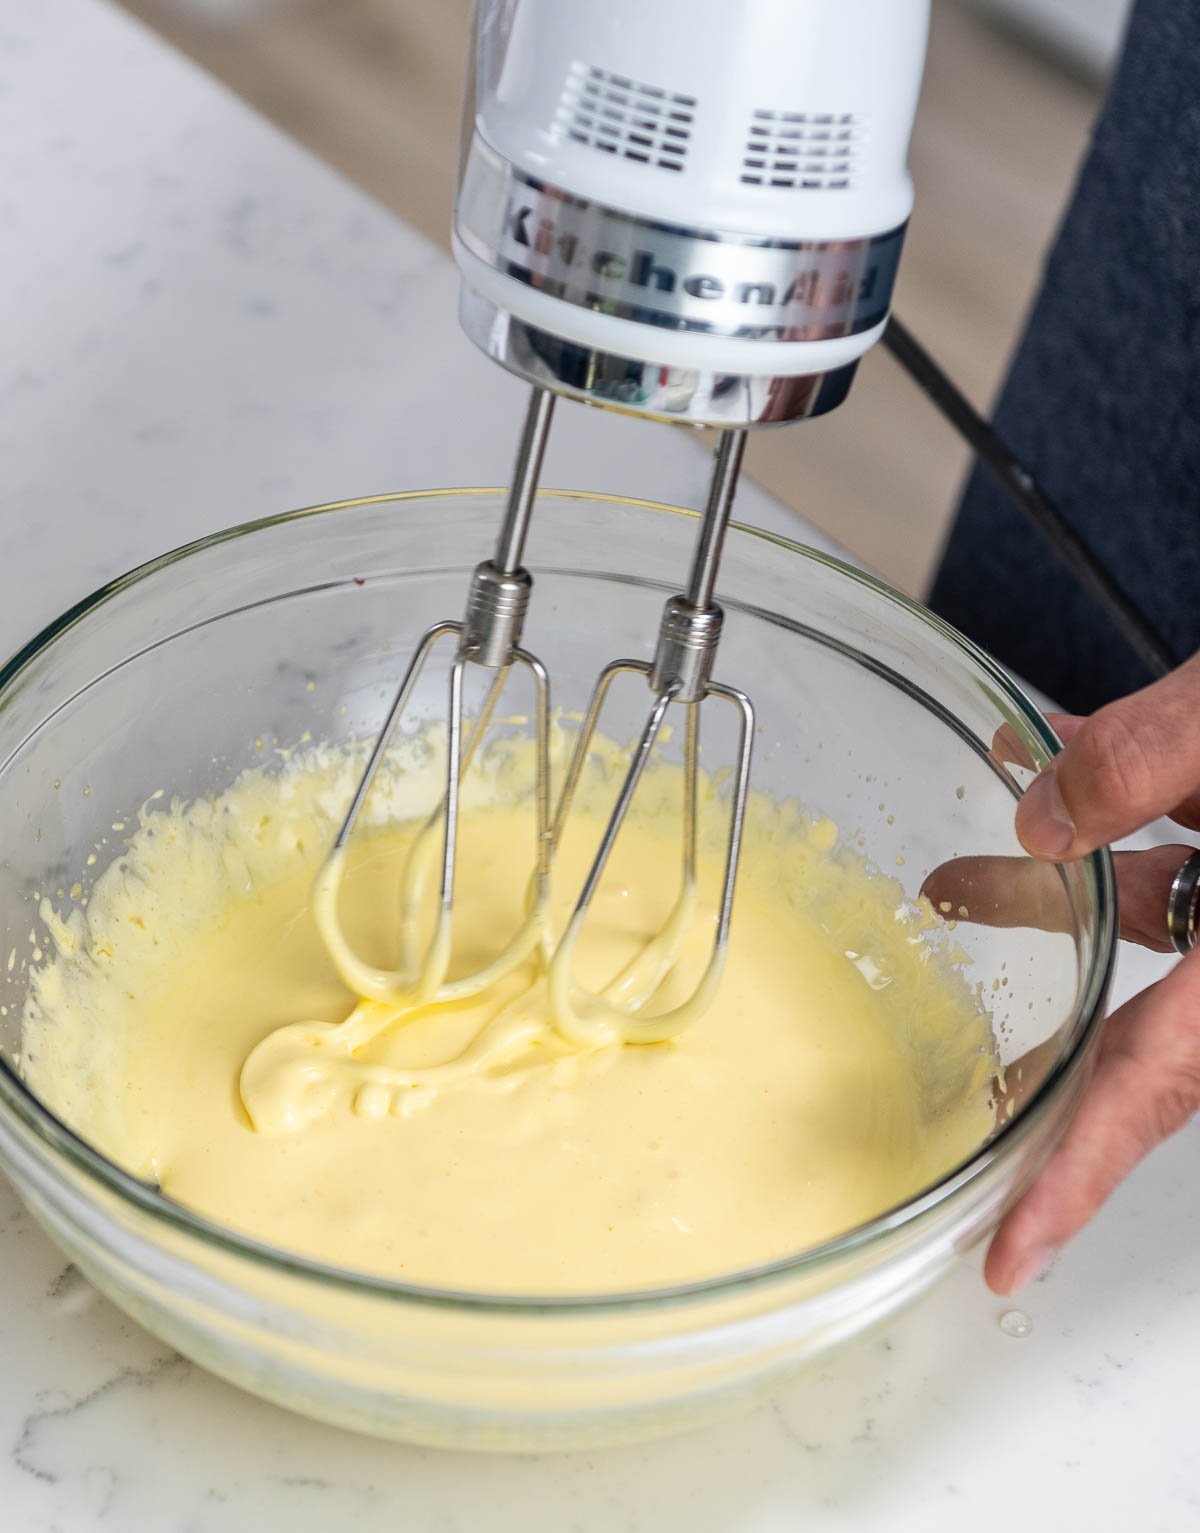 hand mixer lifted just above mixing bowl showing ribbons of batter in the bowl